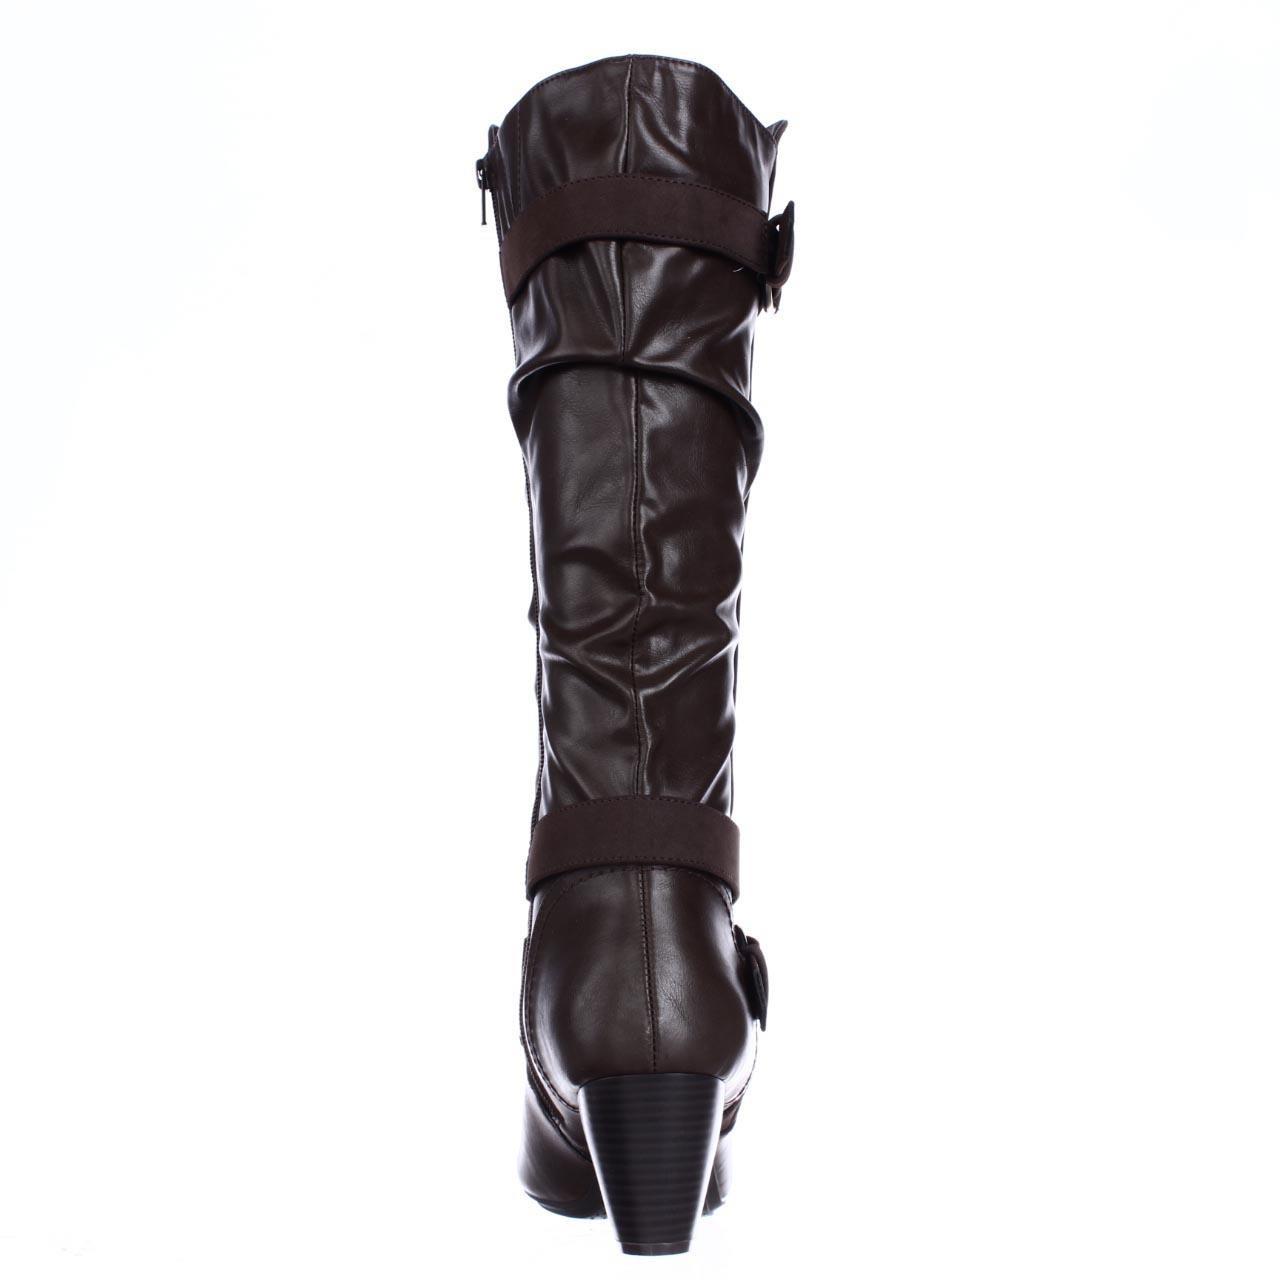 Lyst Rialto Crystal Knee High Slouch Boots Brown In Brown 